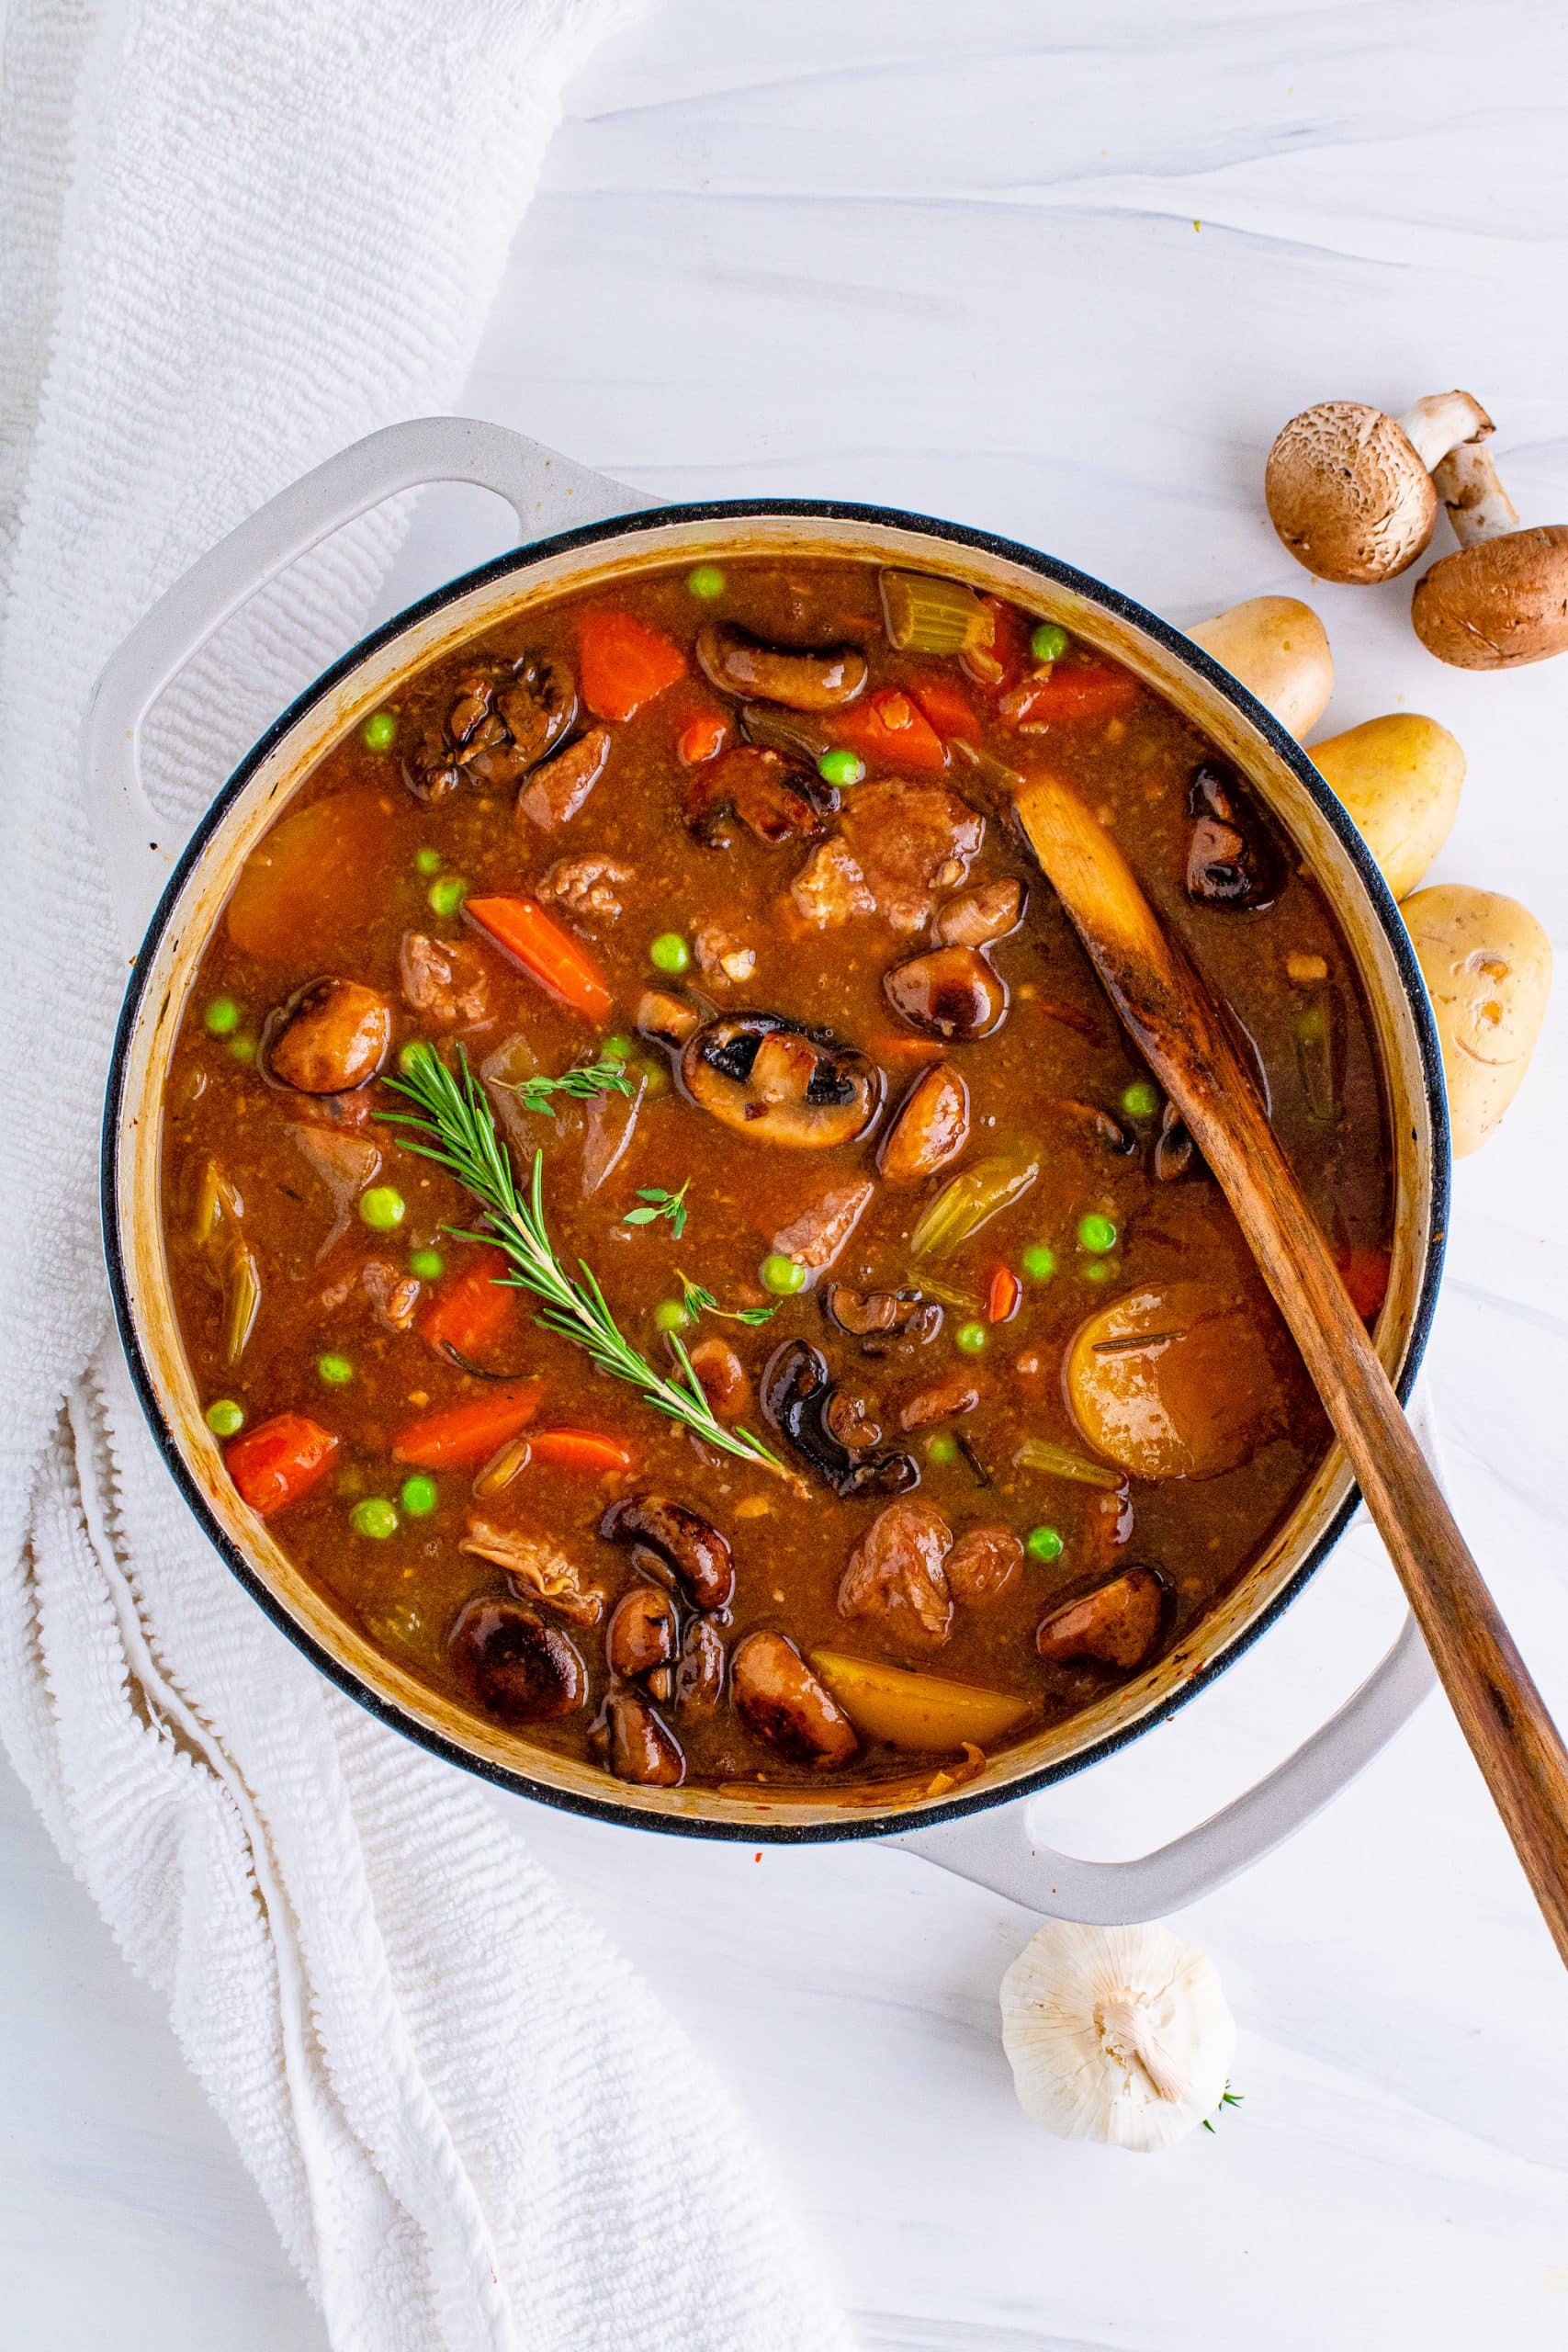 An easy recipe for The Best Venison Stew, with vegetables and mushrooms.